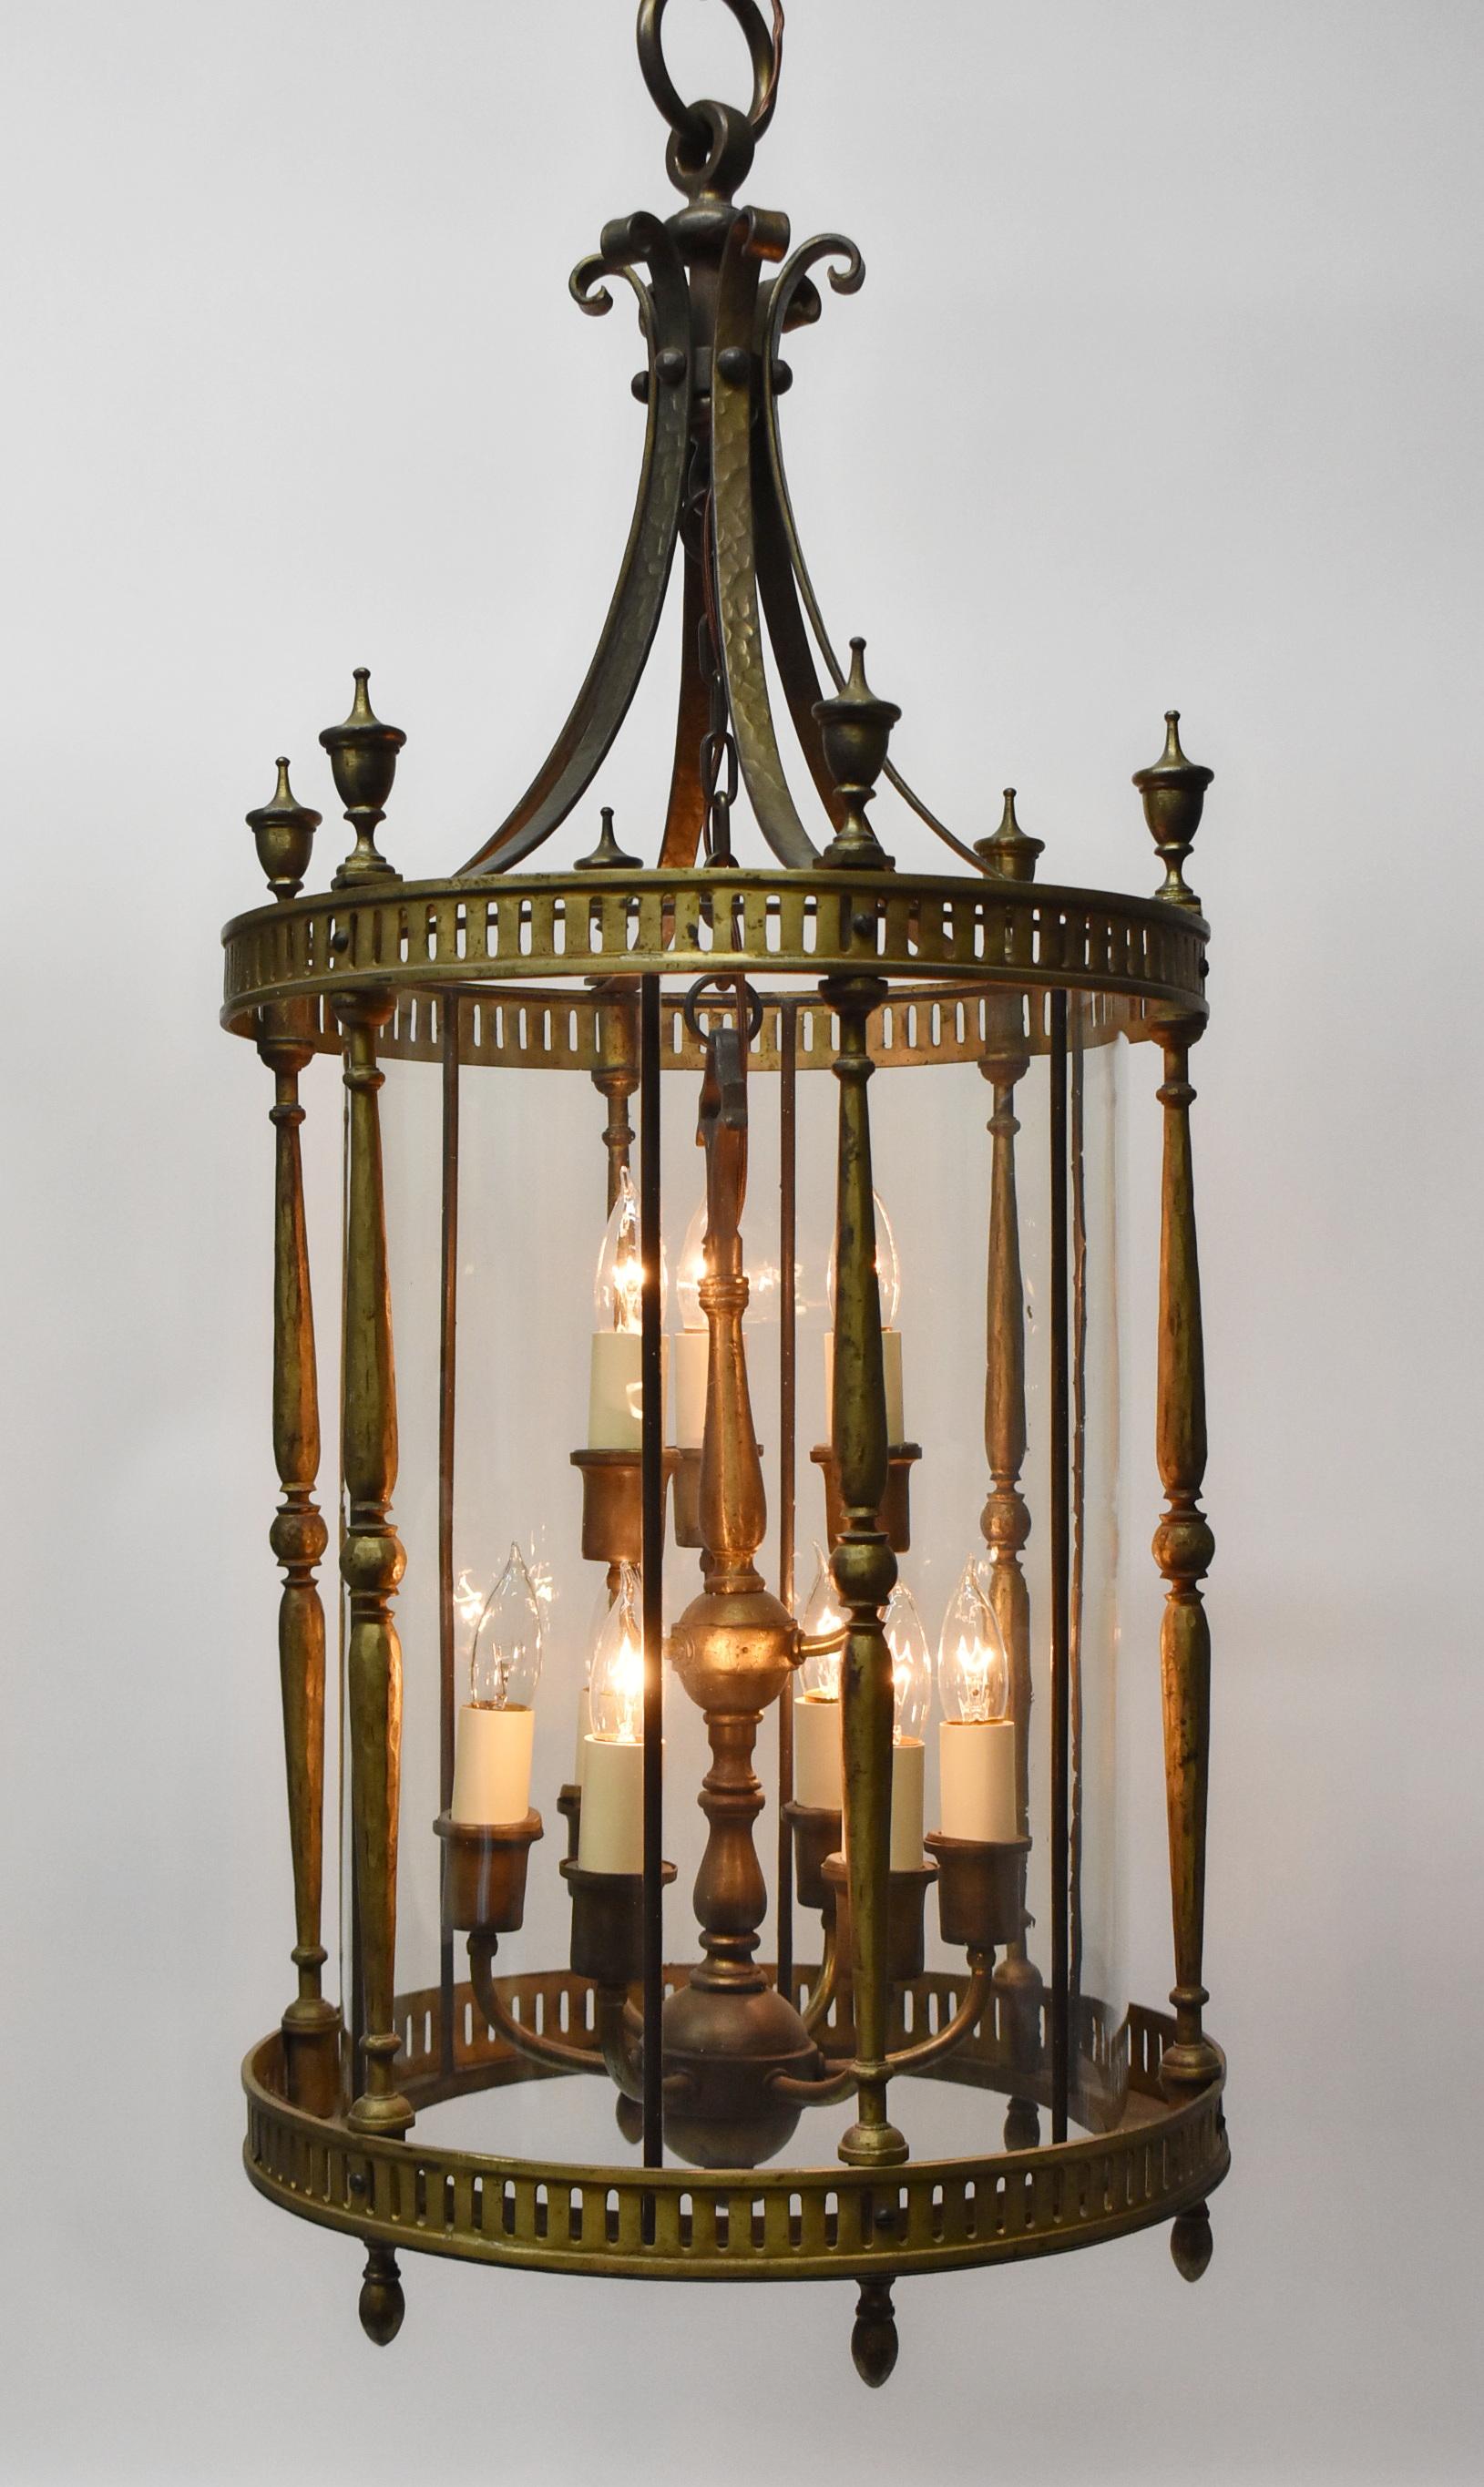 A large heavy bronze cylindrical lantern. This fixture is 40